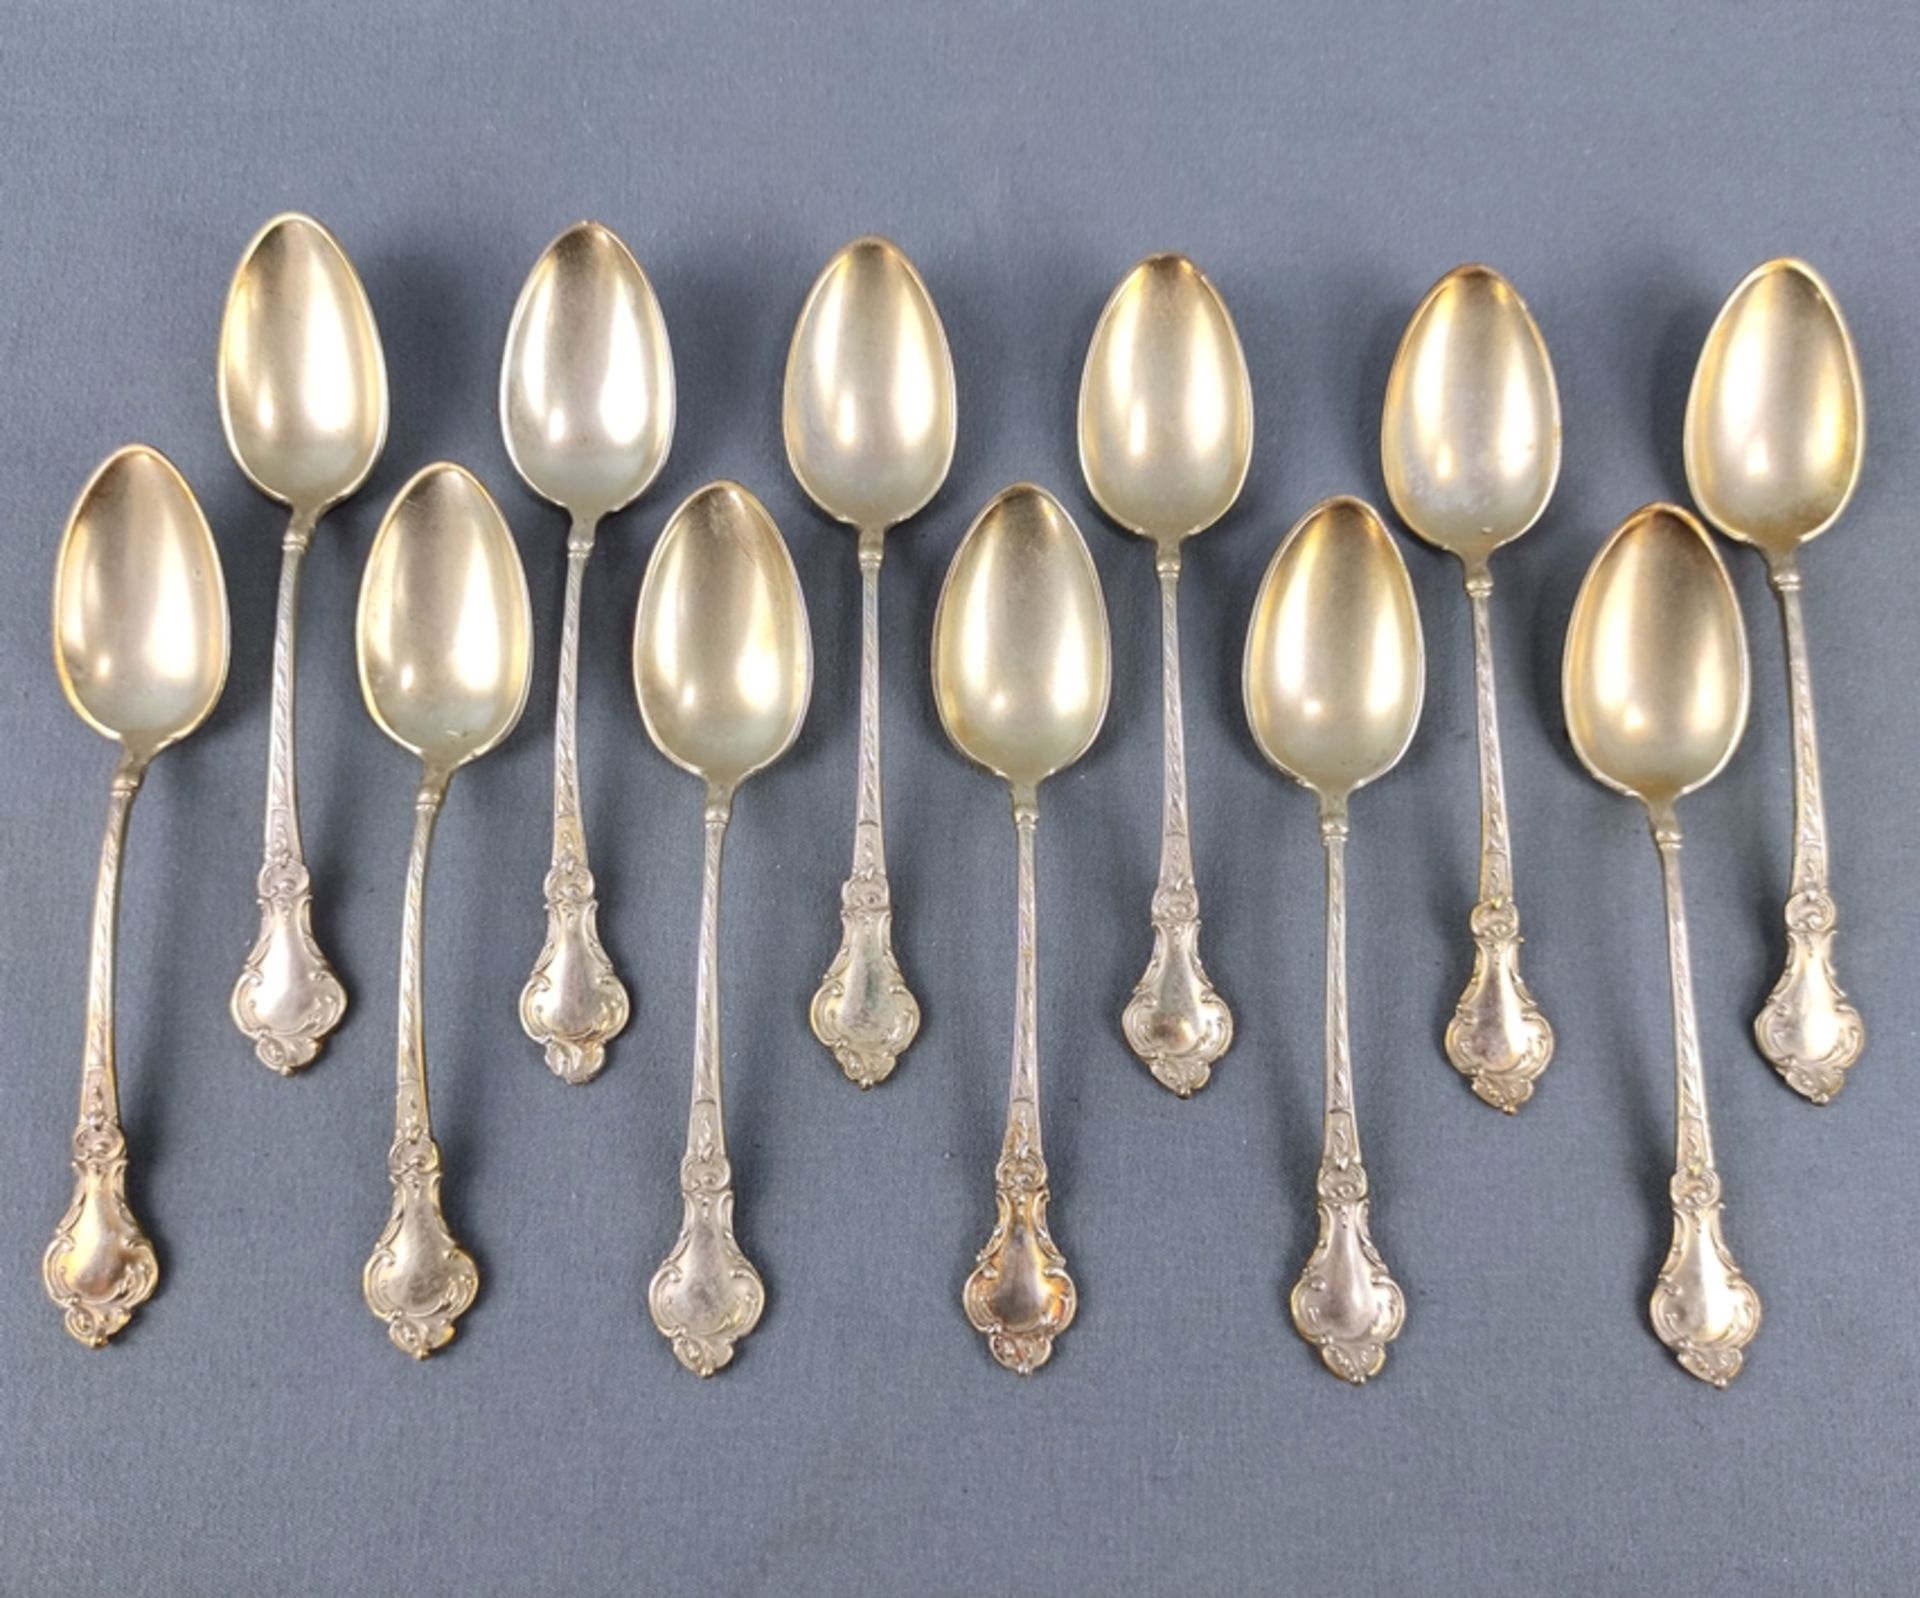 12 demitasse spoons, rocaille decoration in relief, Germany, silver 800, in case "Brinckmann & Lang - Image 2 of 3